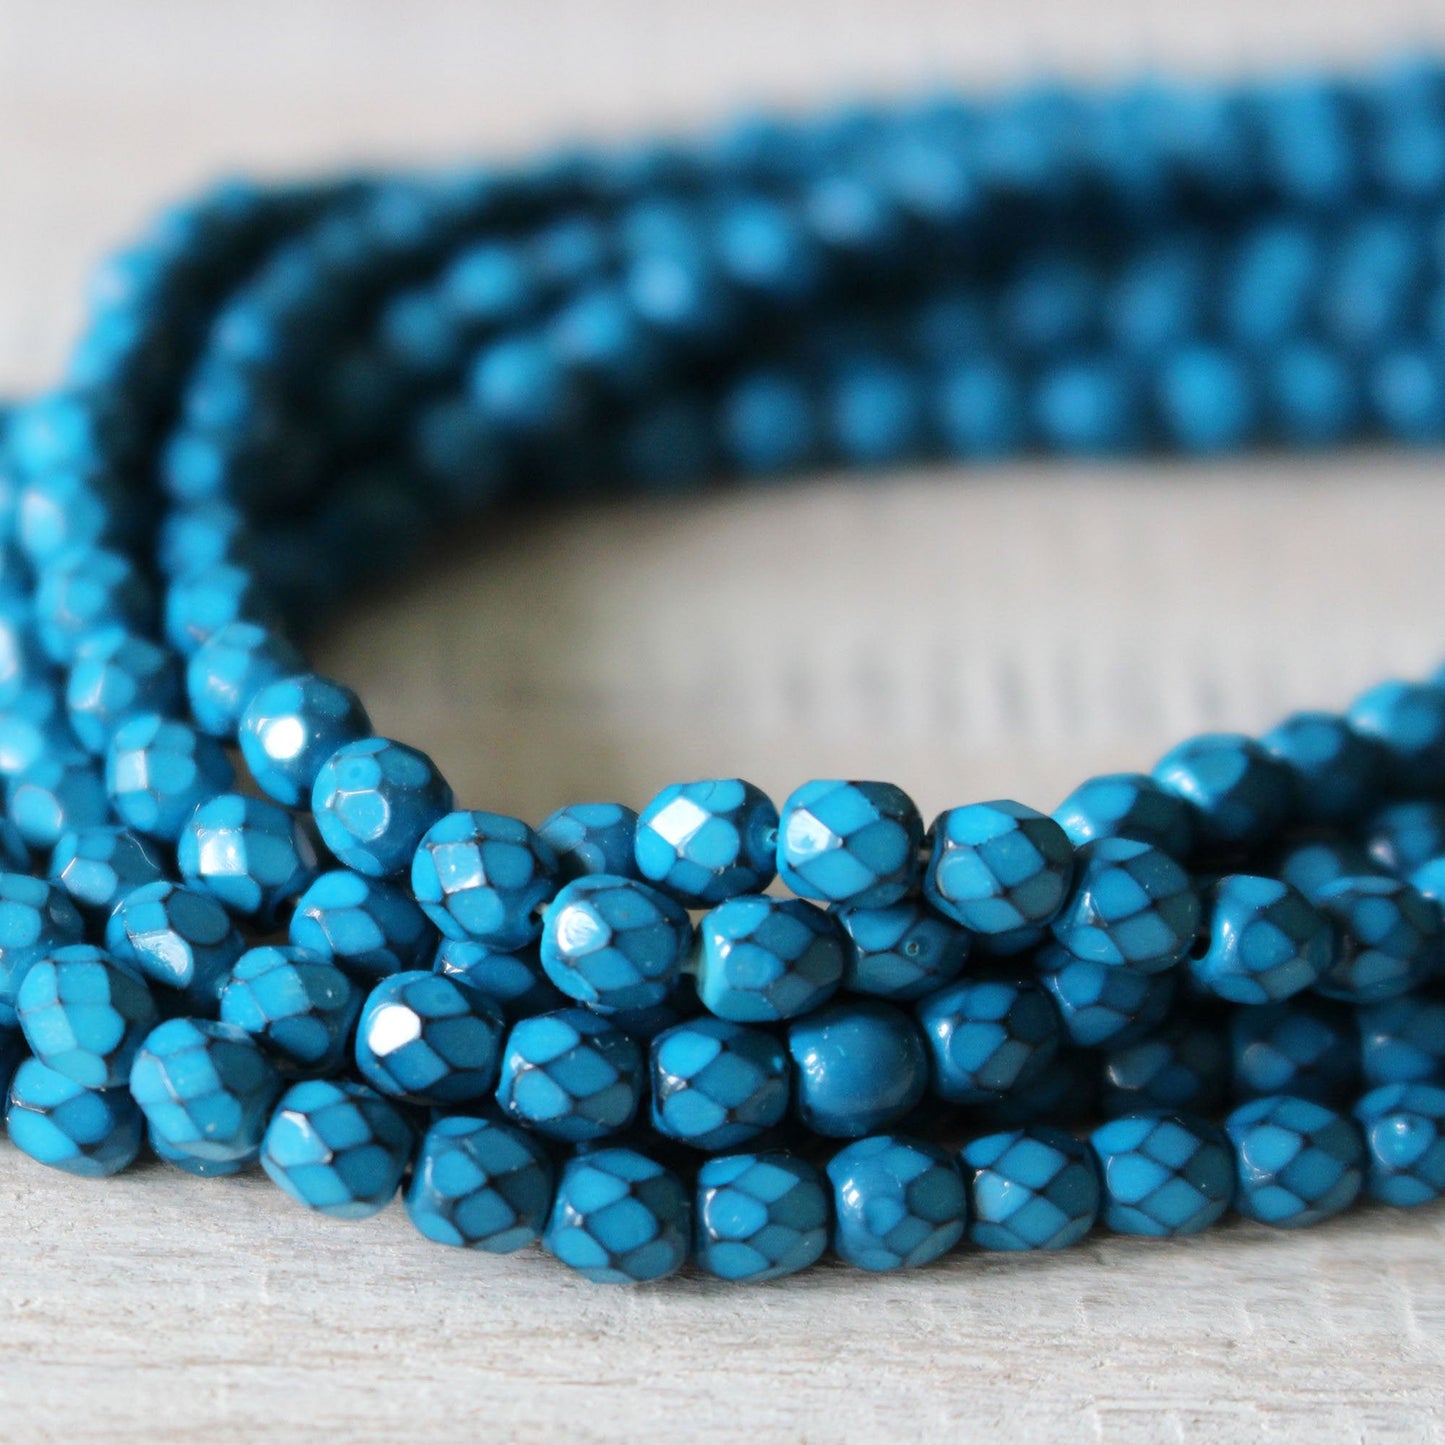 Load image into Gallery viewer, 4mm Round Firepolished Beads - Turquoise Blue  - 50 Beads
